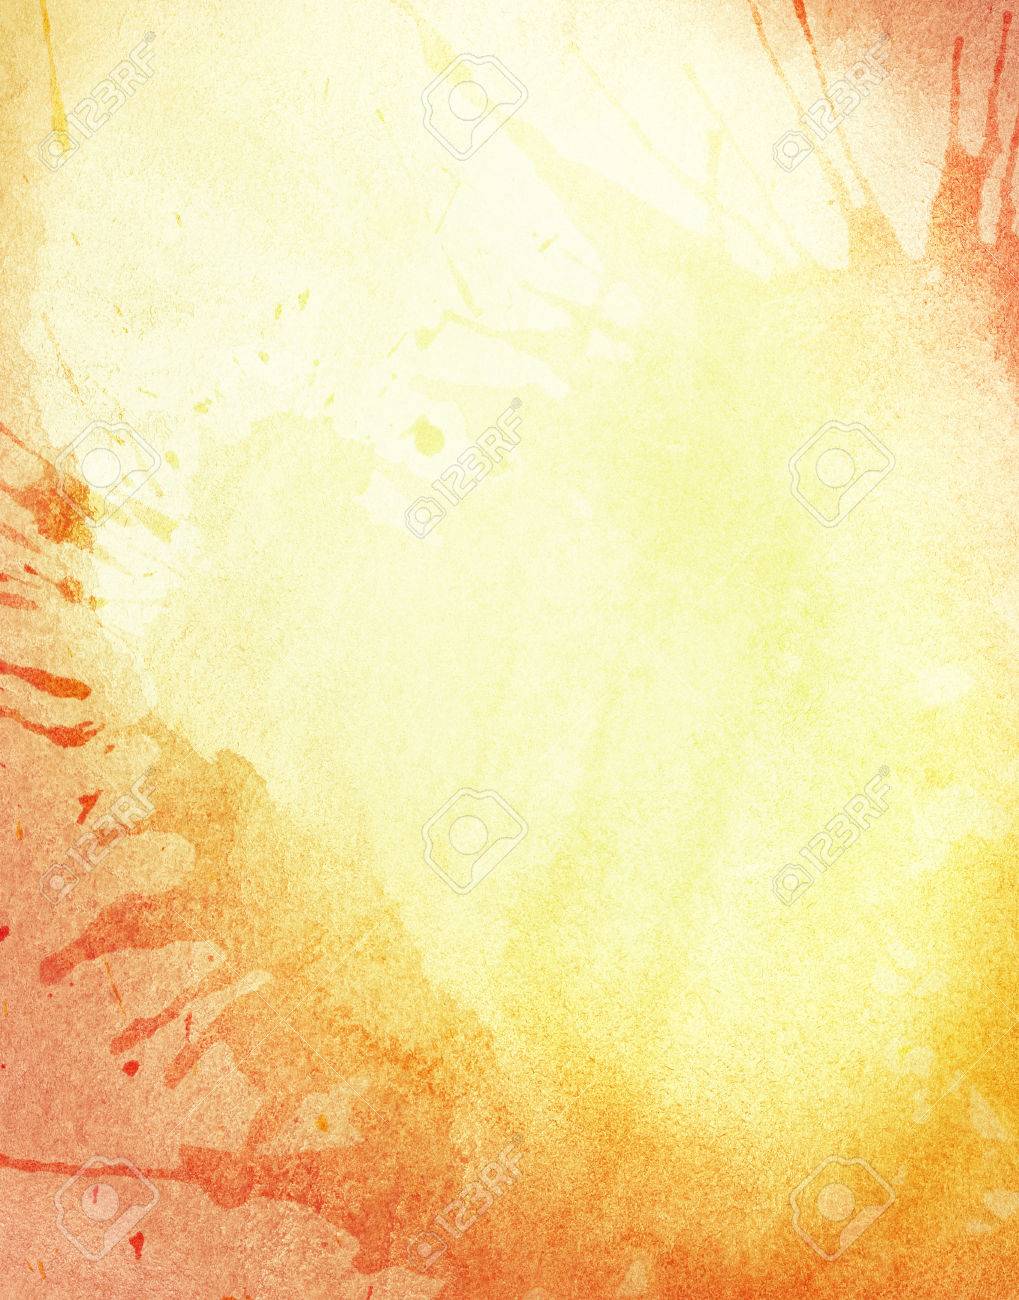 Abstract Light Orange Watercolor Background With Copy Space And